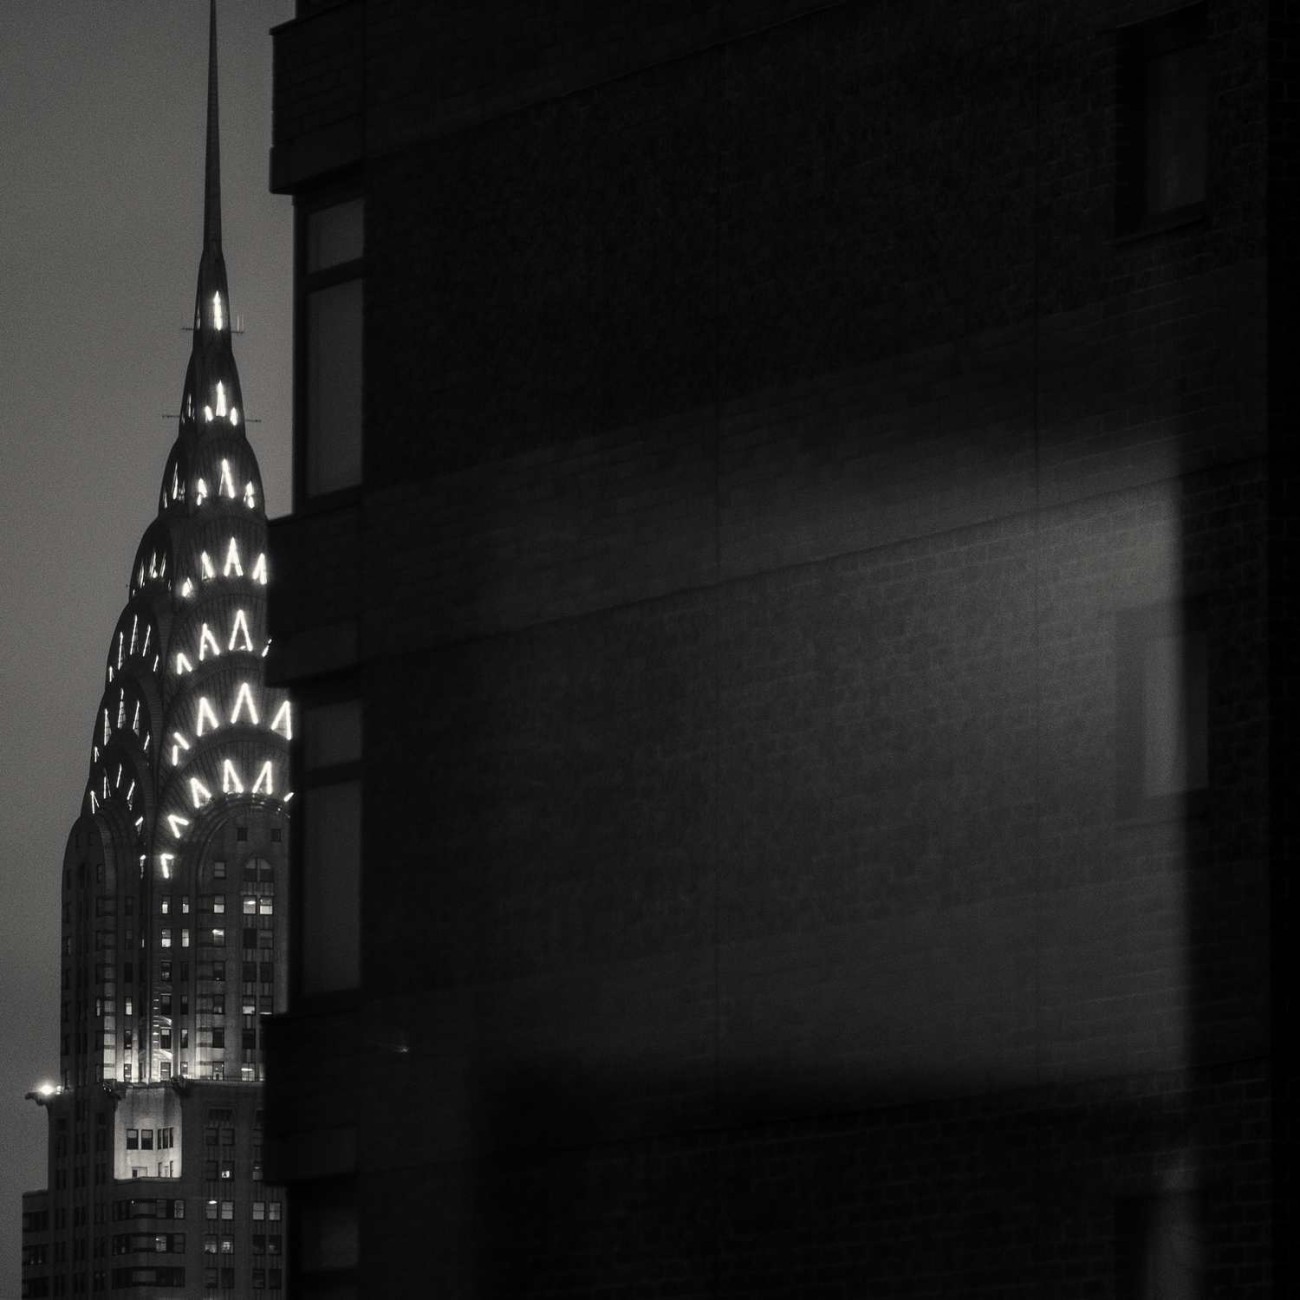 Top of the Chrysler Building at night, NY, 2015